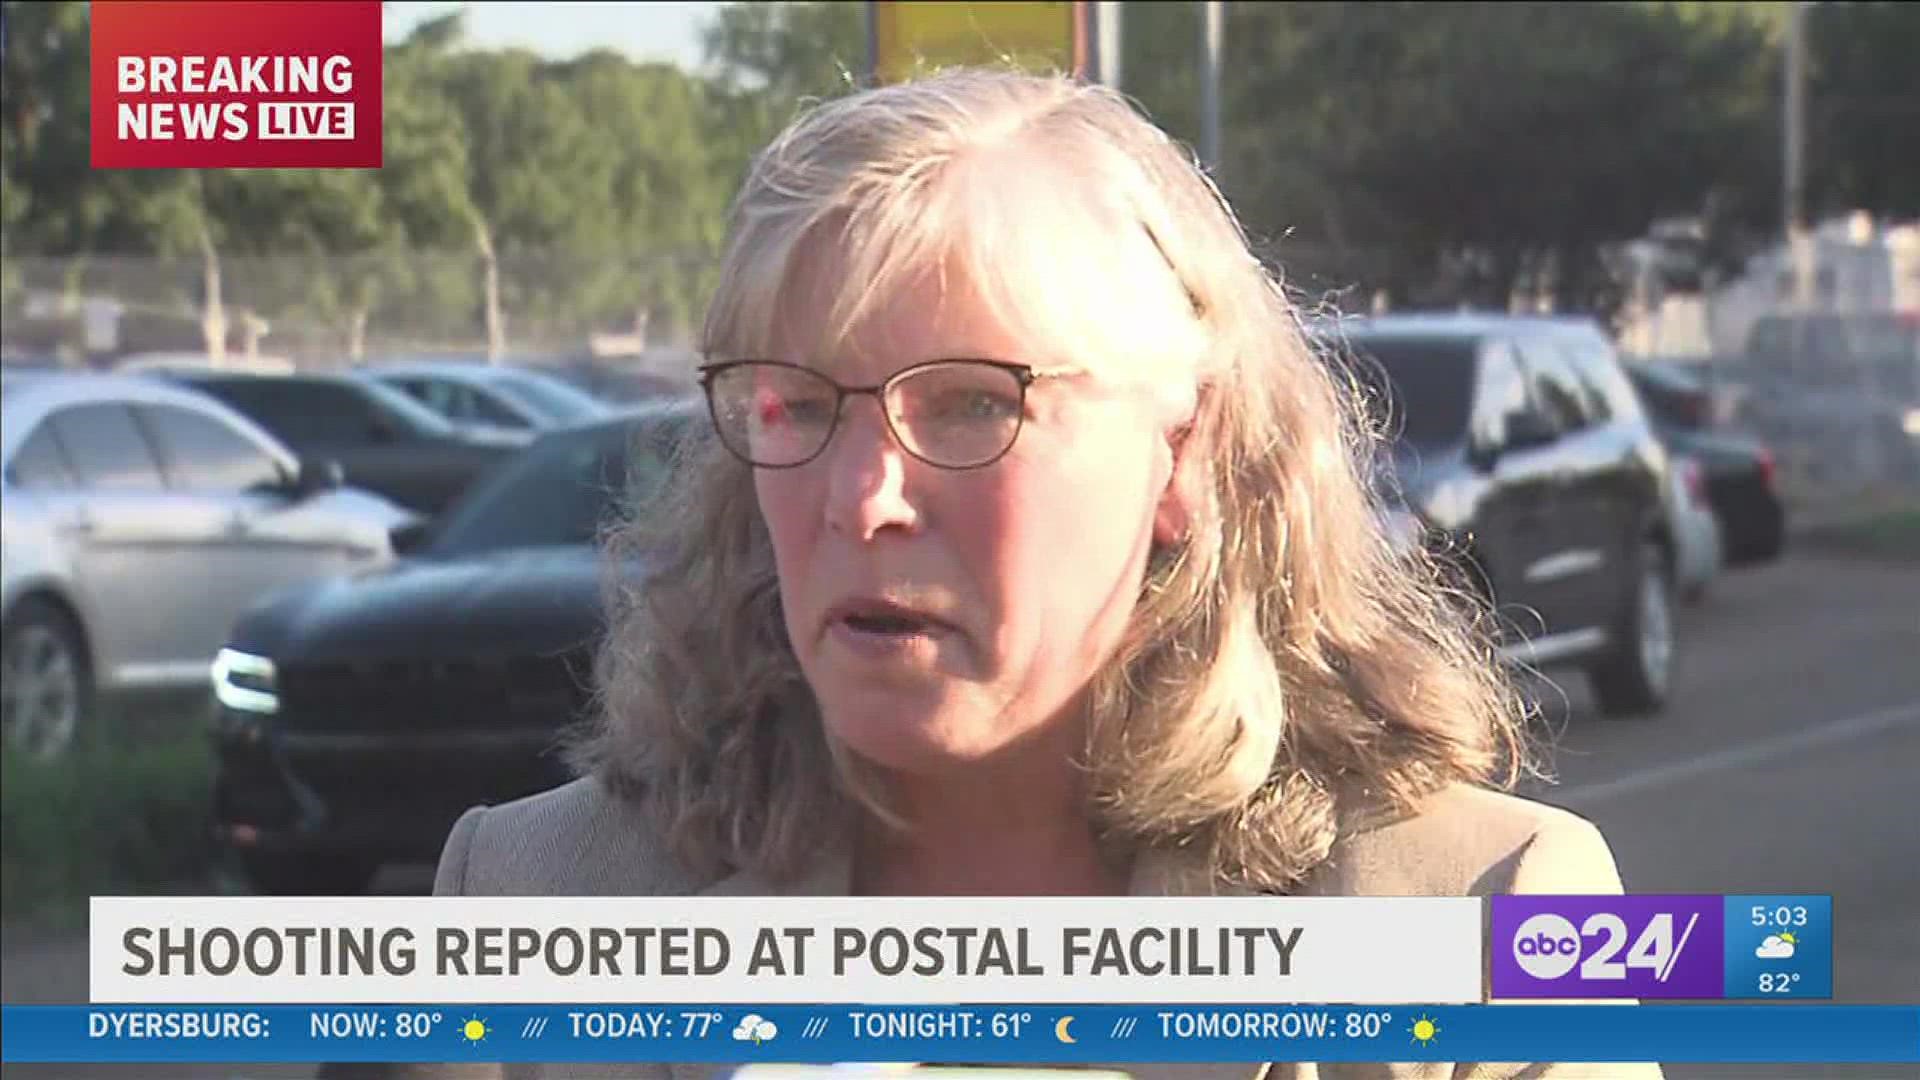 Federal authorities said three people are dead - one of them the gunman - after a shooting at a U.S. Postal Service facility in Orange Mound Tuesday afternoon.